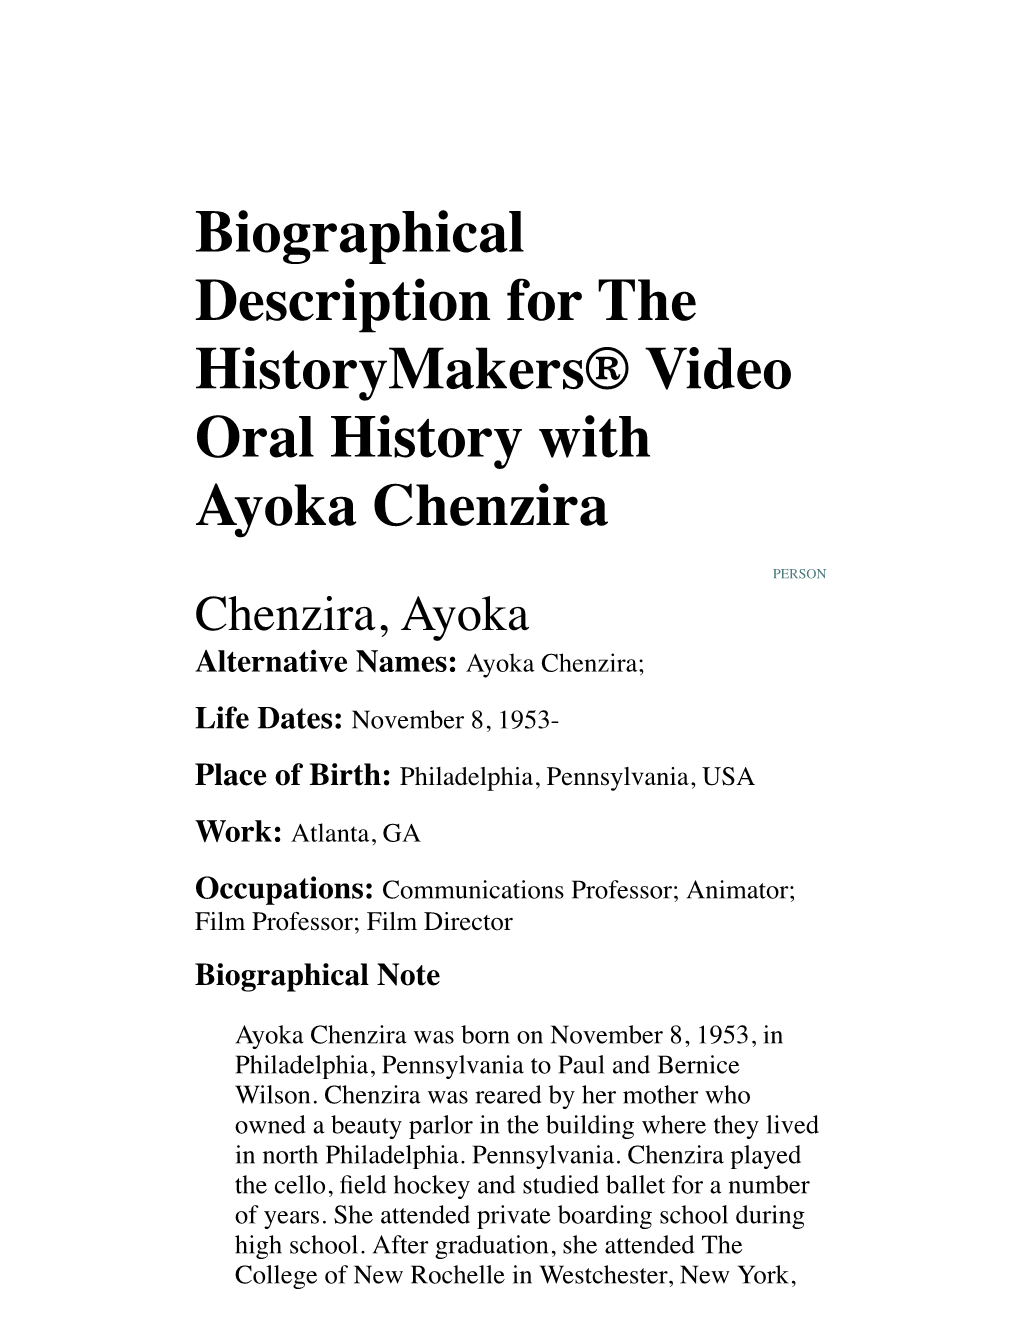 Biographical Description for the Historymakers® Video Oral History with Ayoka Chenzira